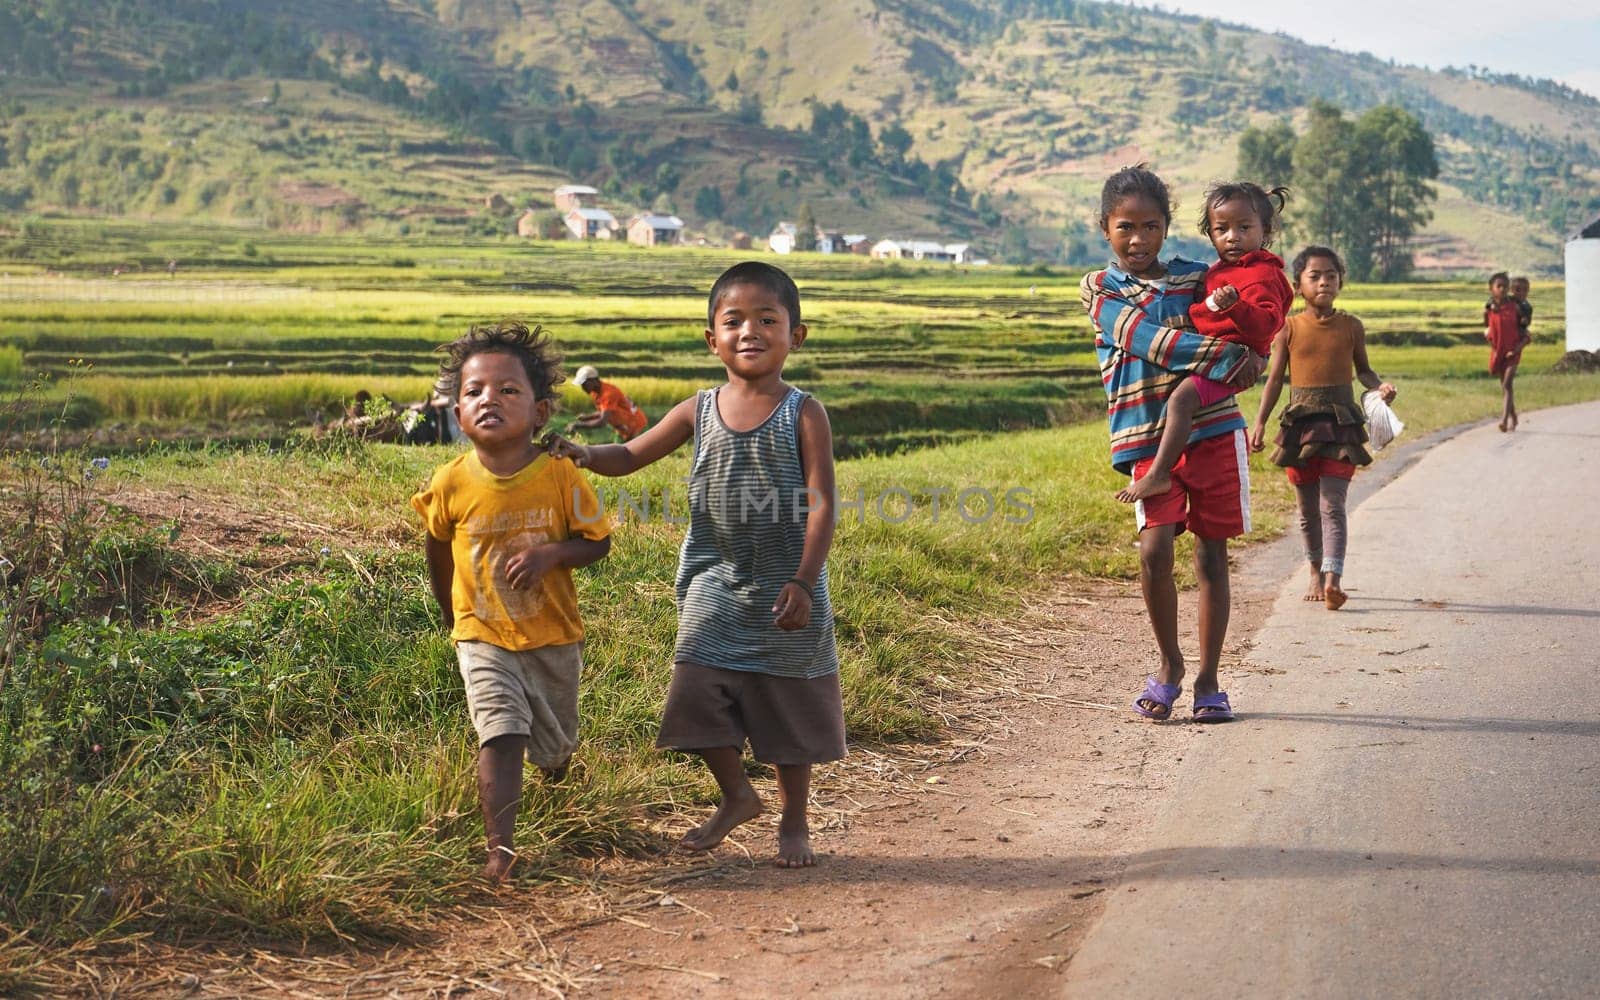 Manandoana, Madagascar - April 26, 2019: Group of unknown Malagasy kids running on road next to rice field, small hills in background, people at Madagascar are poor but cheerful, especially children